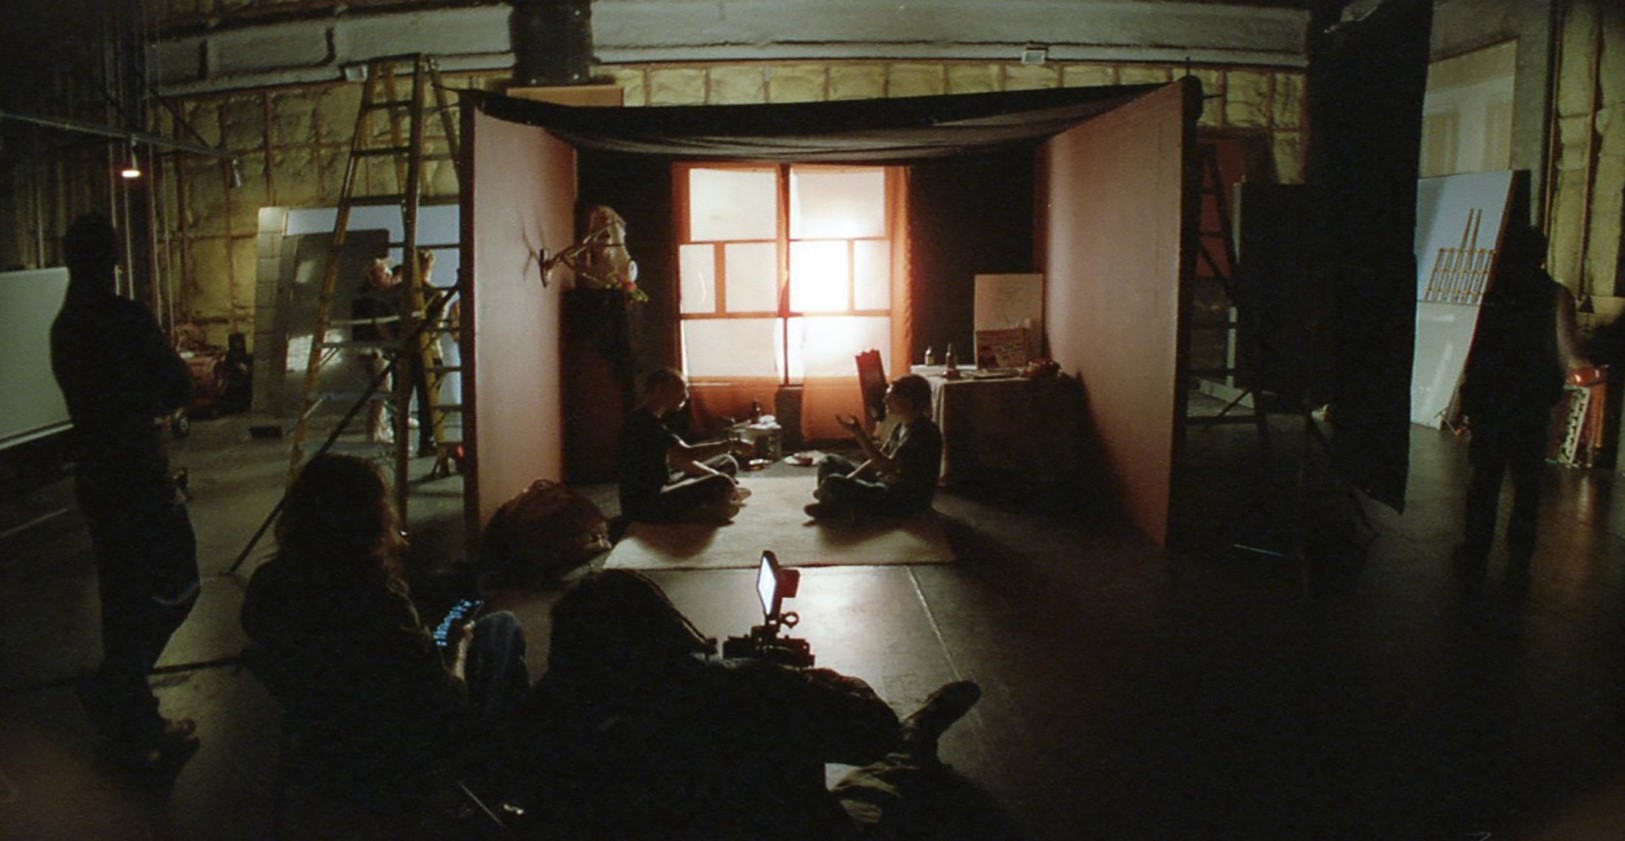 Inside the sound stage with a fake room set up and reddish-brown lighting